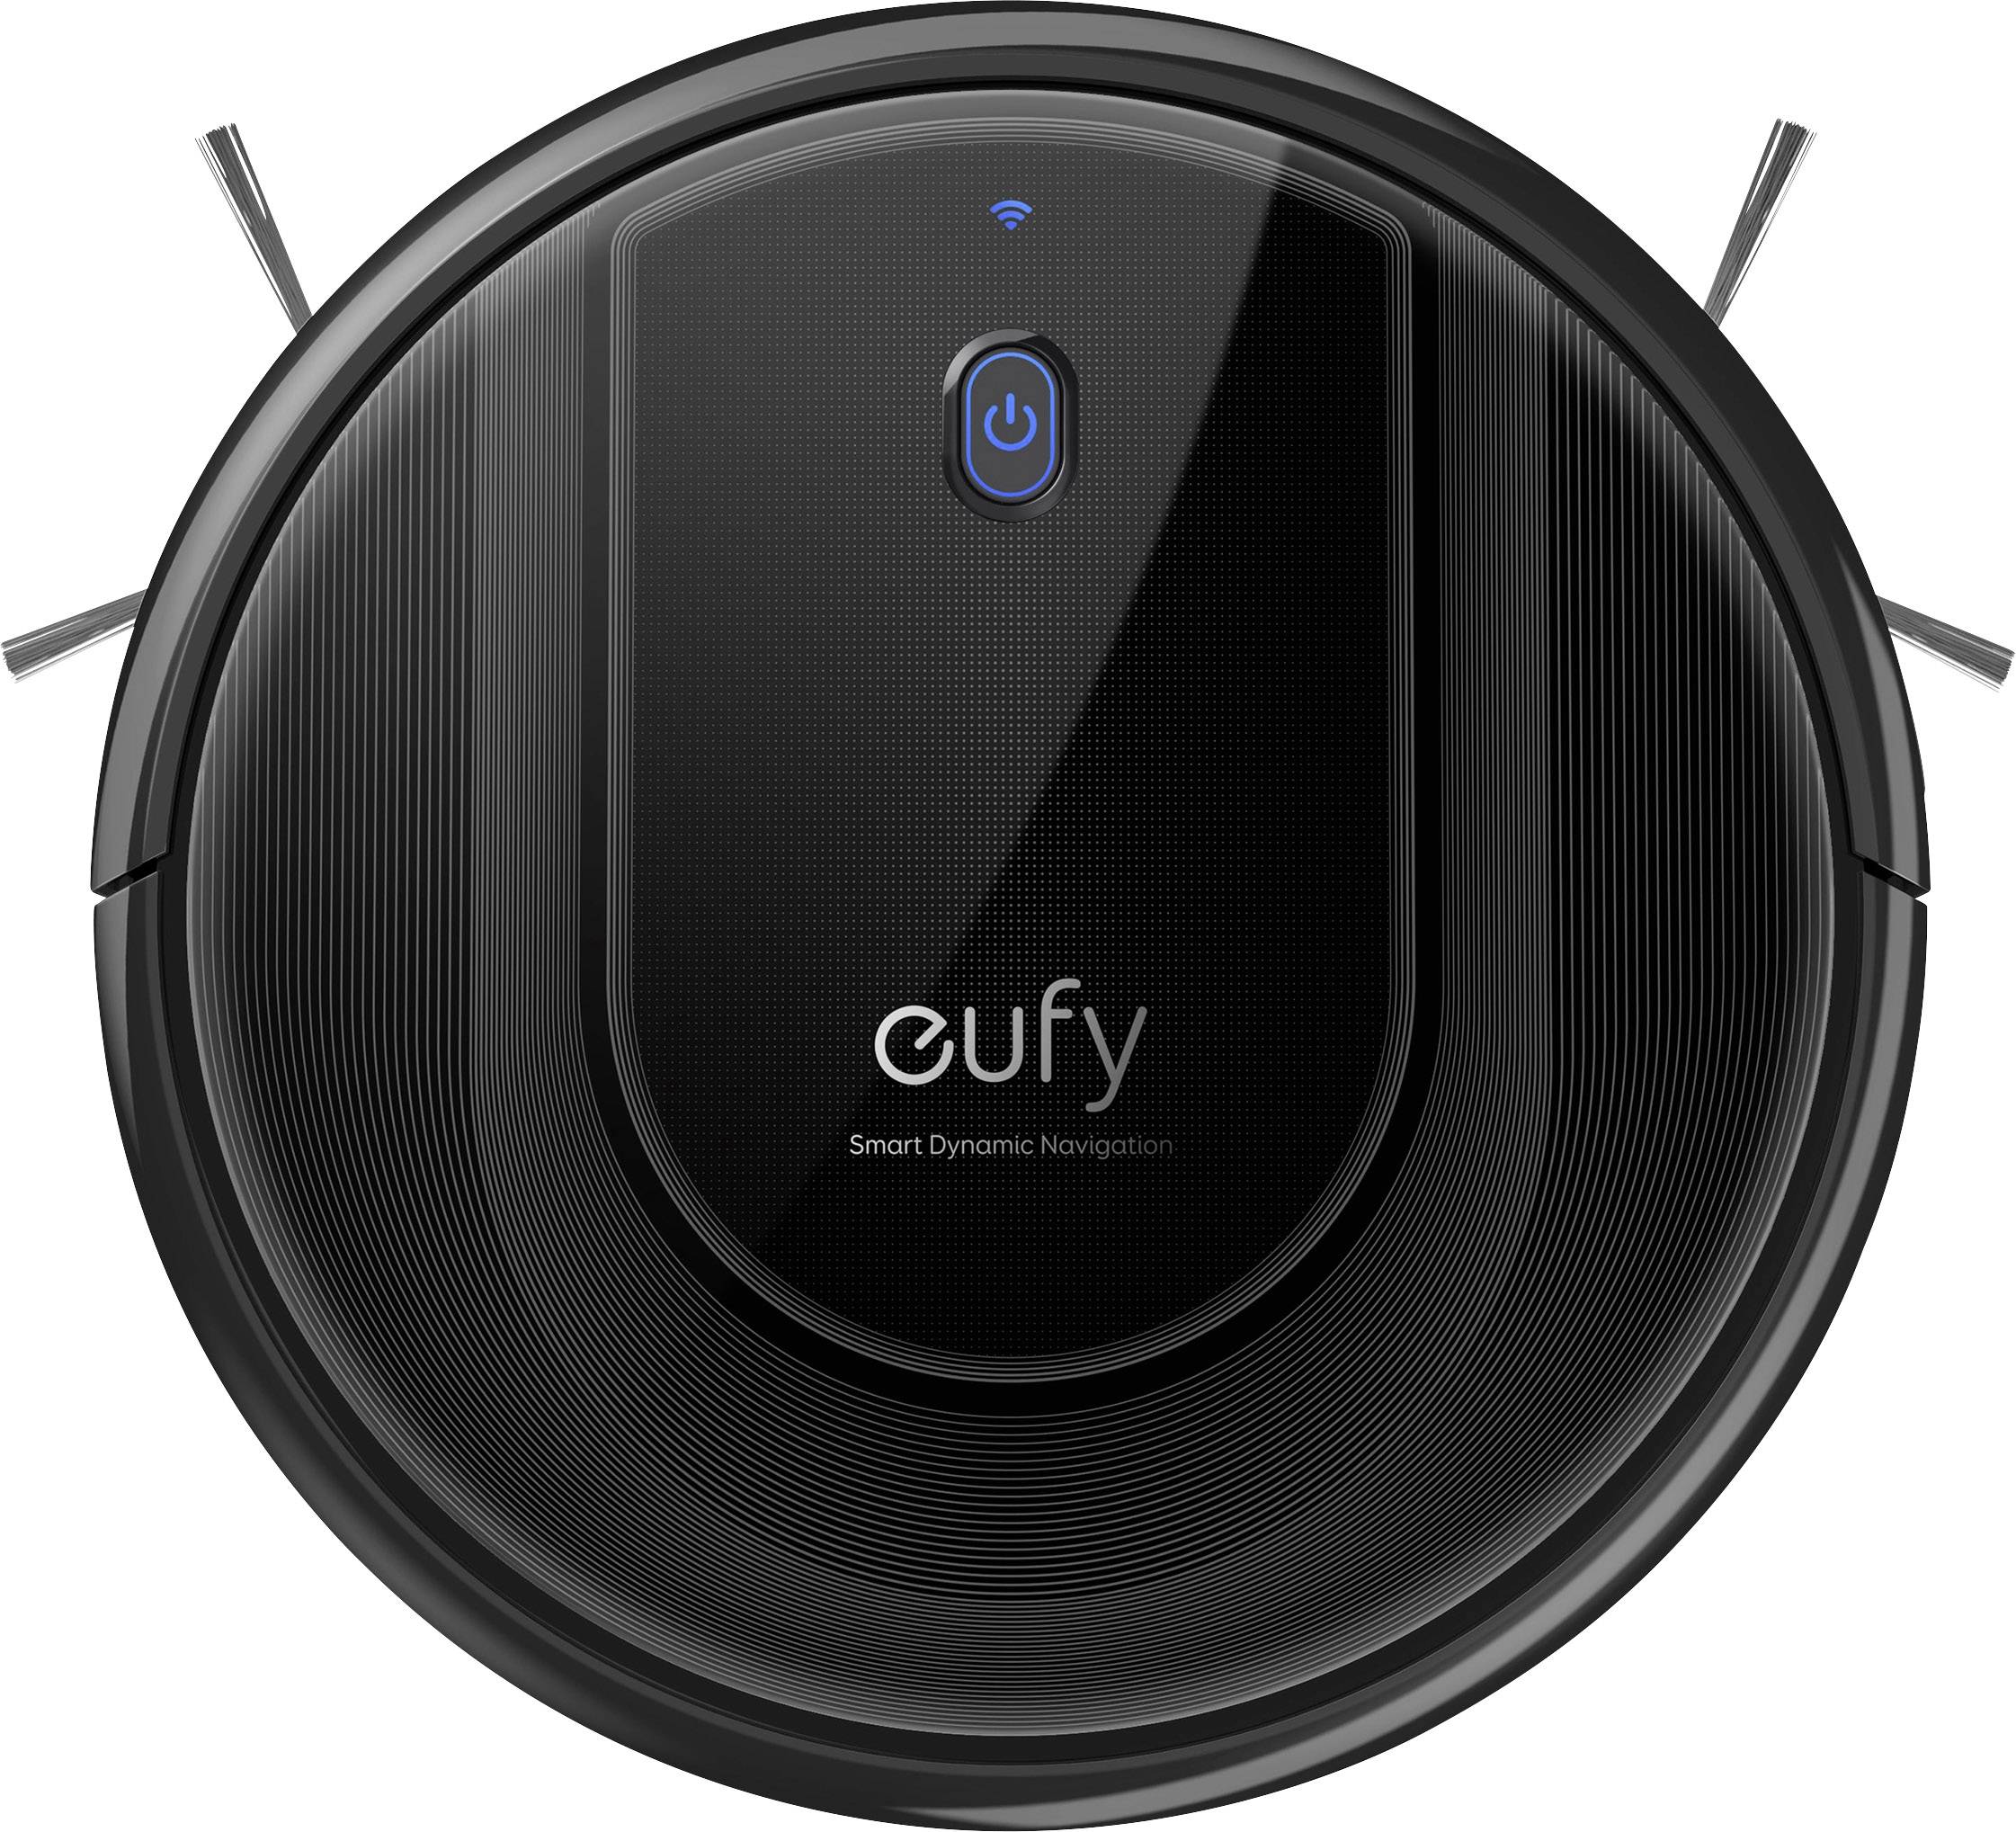 Eufy Robot Vacuum Cleaner with Mopping Robovac G10 Hybrid-1